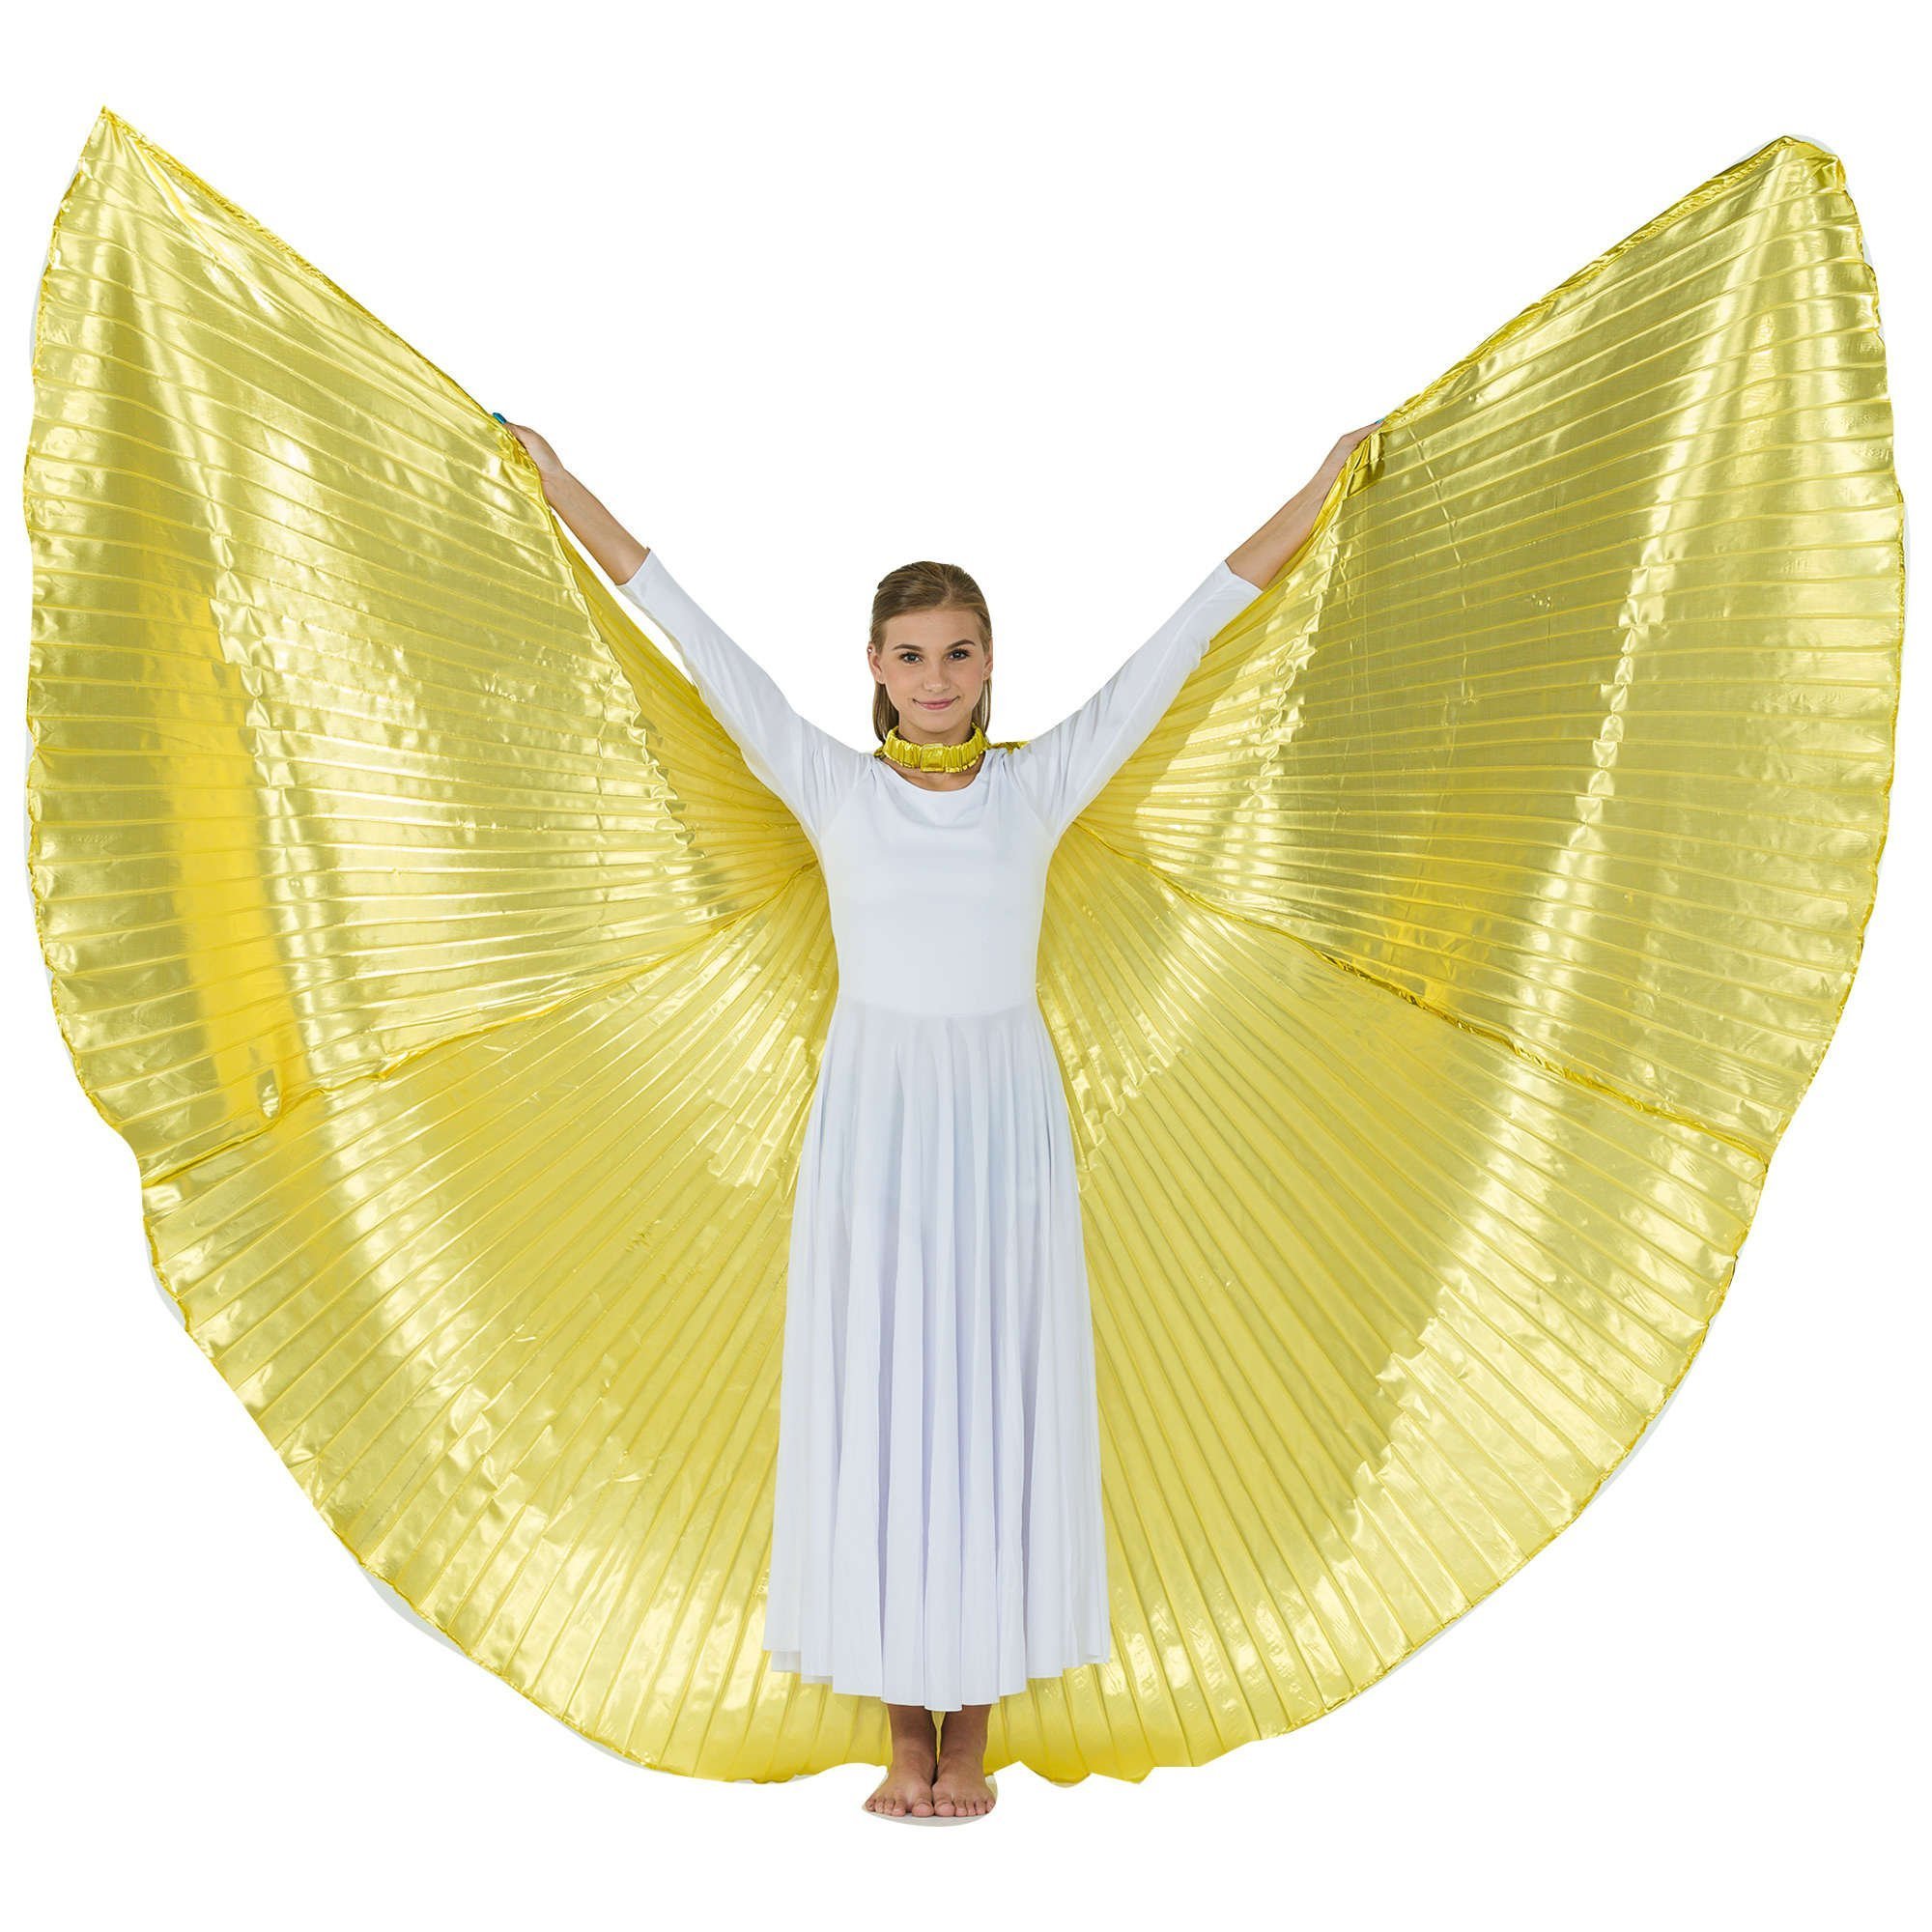 Solid Gold Worship Angel Wing